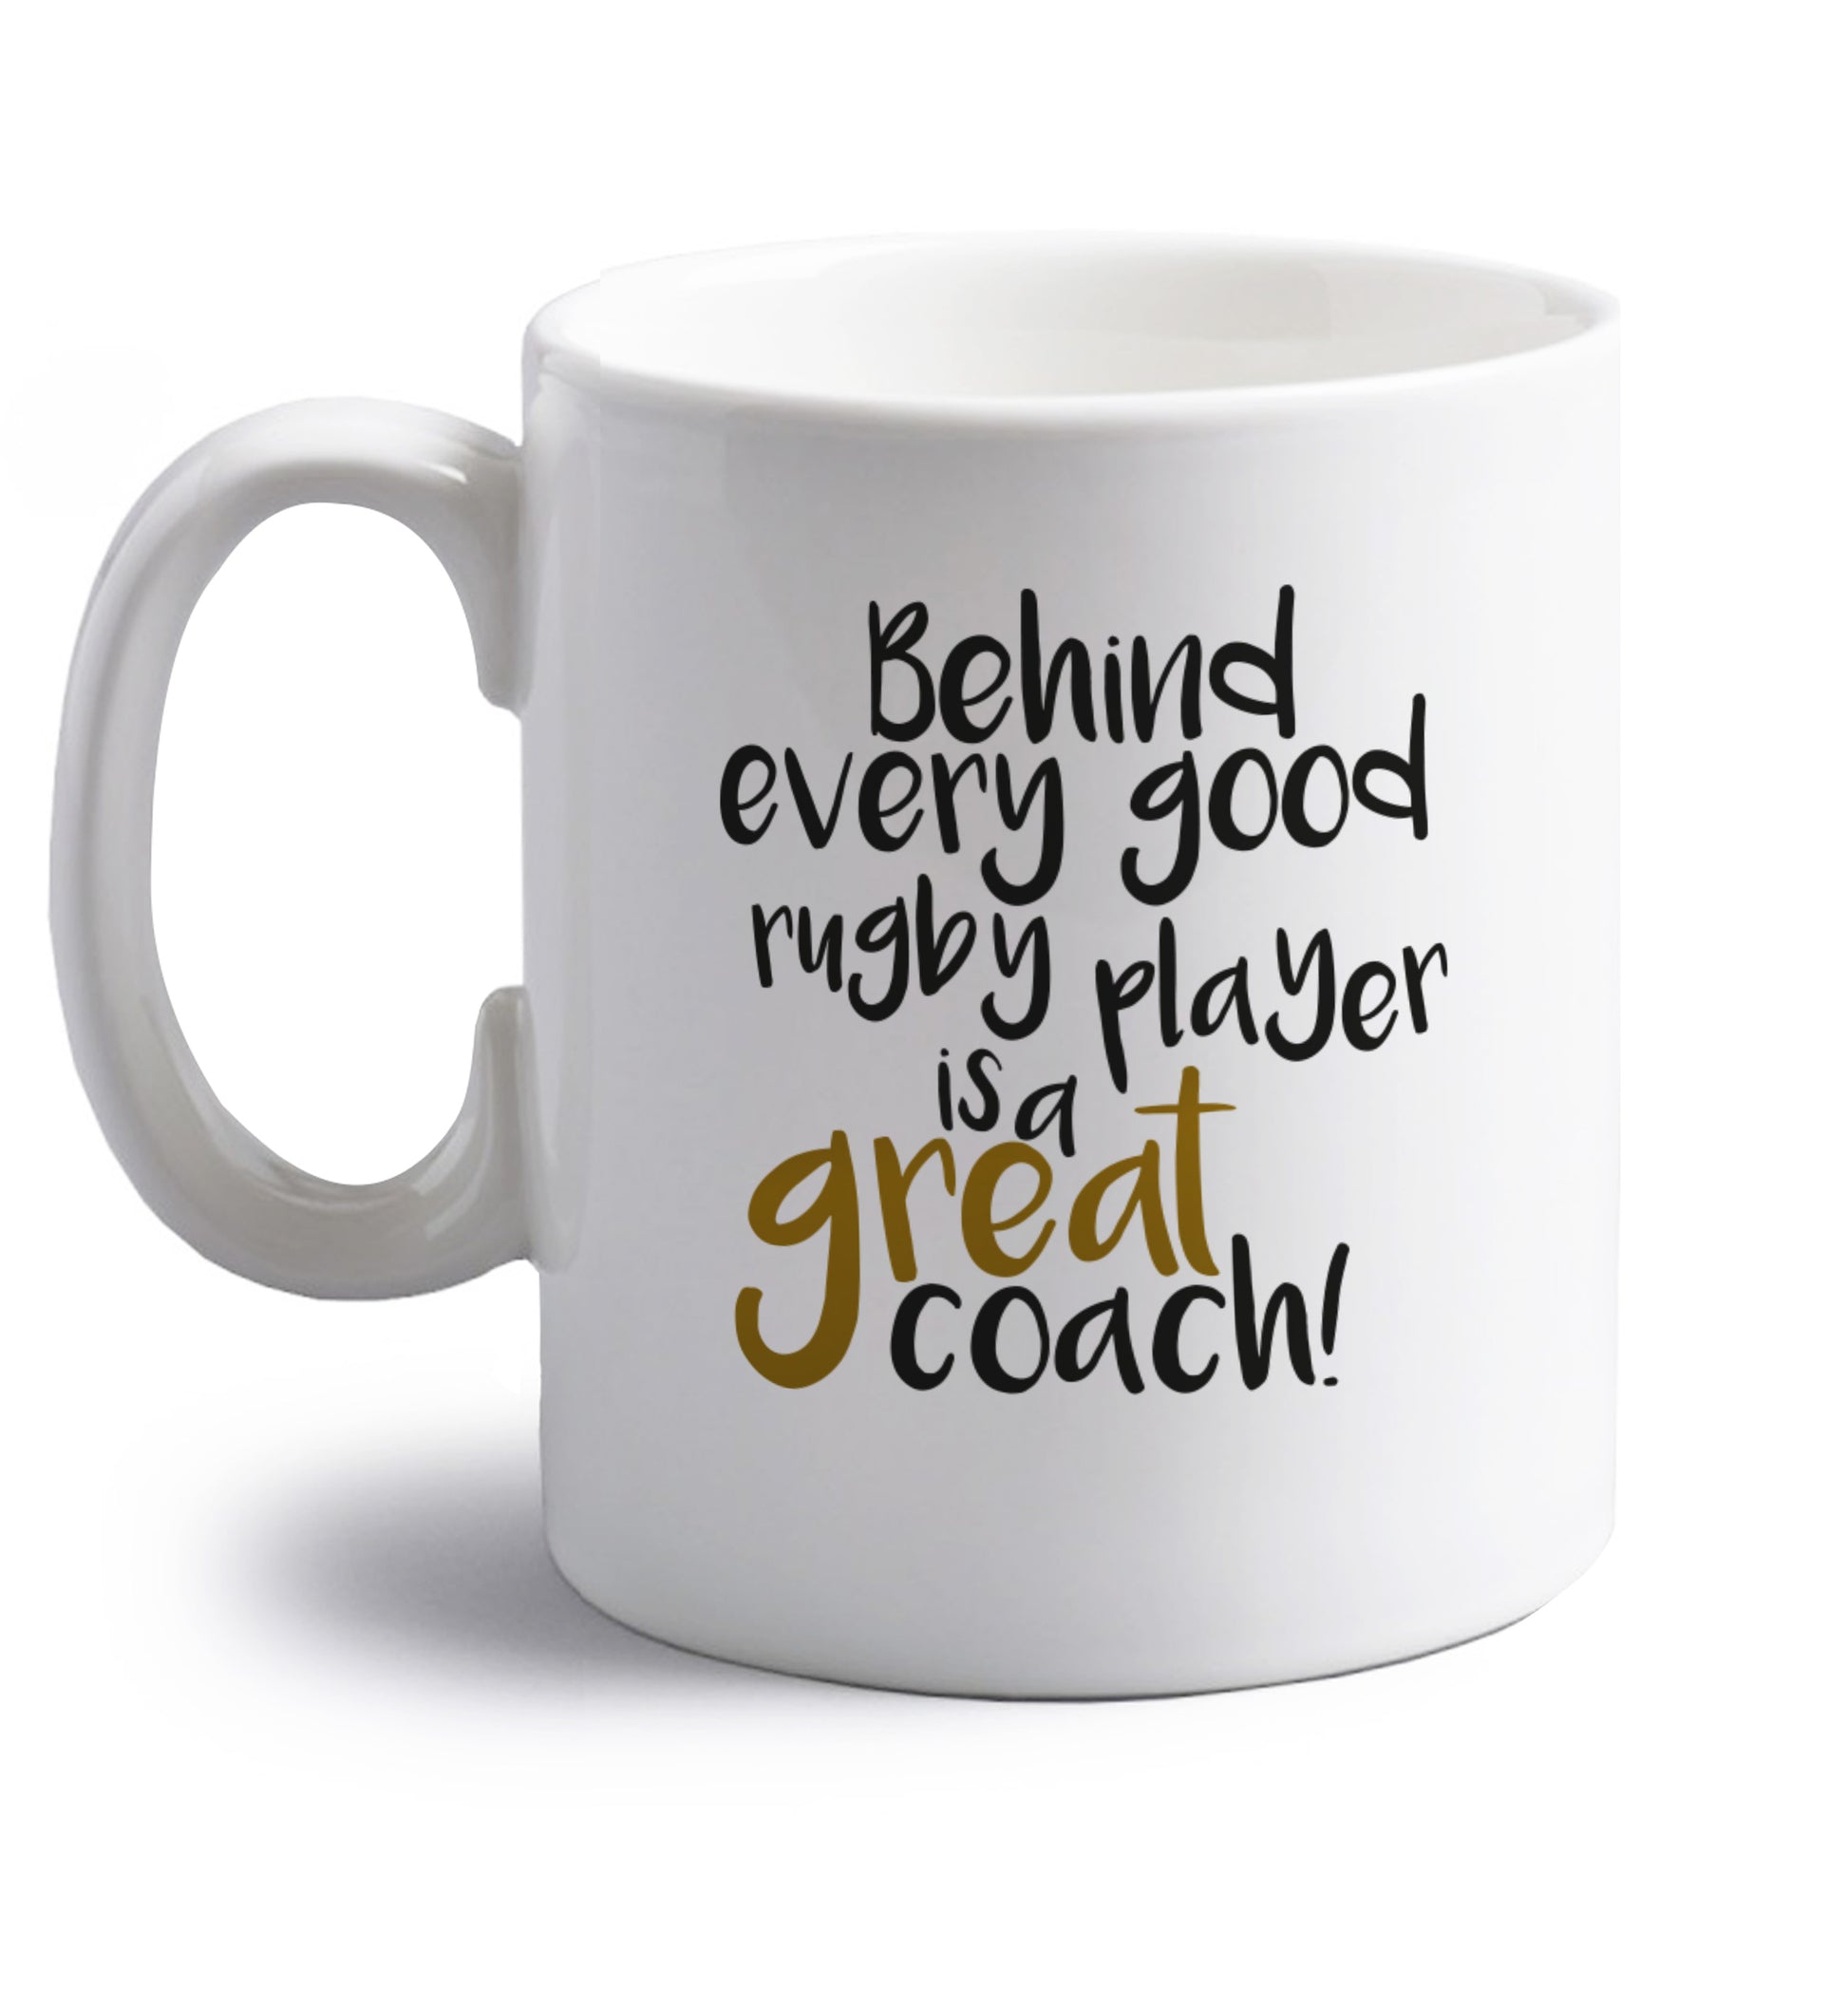 Behind every goor rugby player is a great coach right handed white ceramic mug 